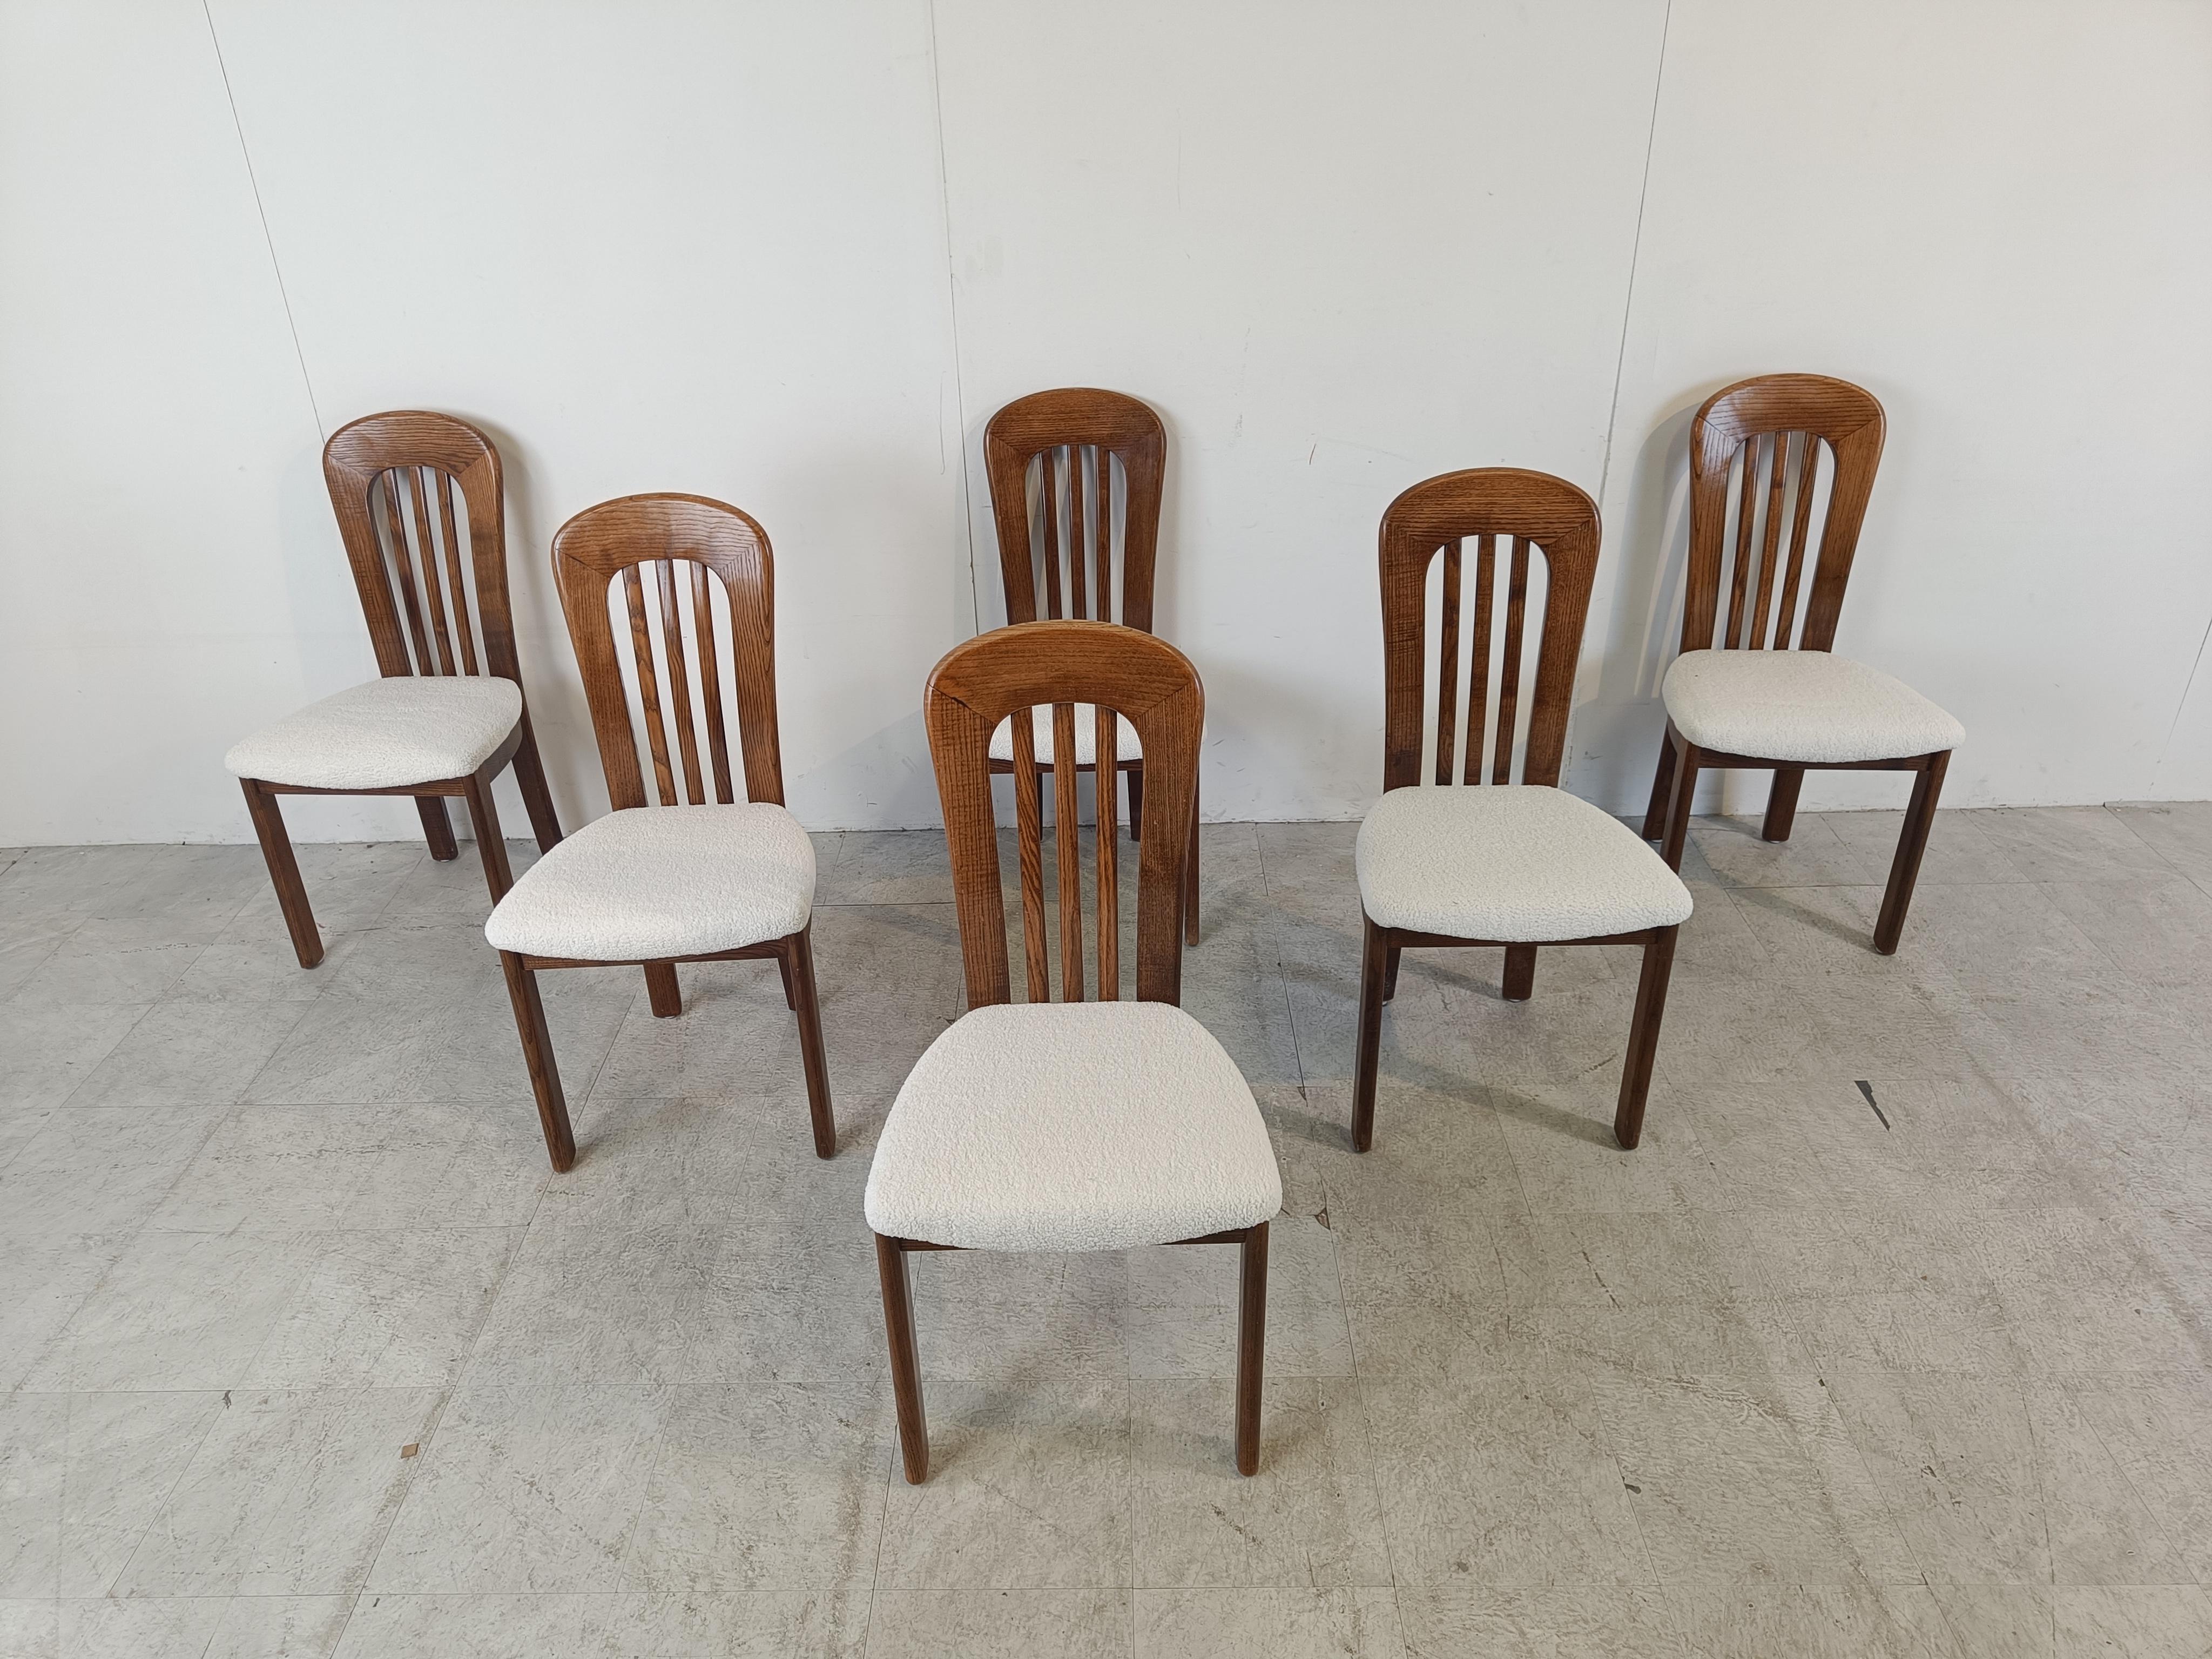 Nicely designed scandinavian dining chairs with wooden frames and newly upholstered seats in bouclé fabric.

Beautiful, timeless design which is very sturdy as well.

Good condition.

1960s - Denmark

Dimensions:
Height: 95cm/37.40